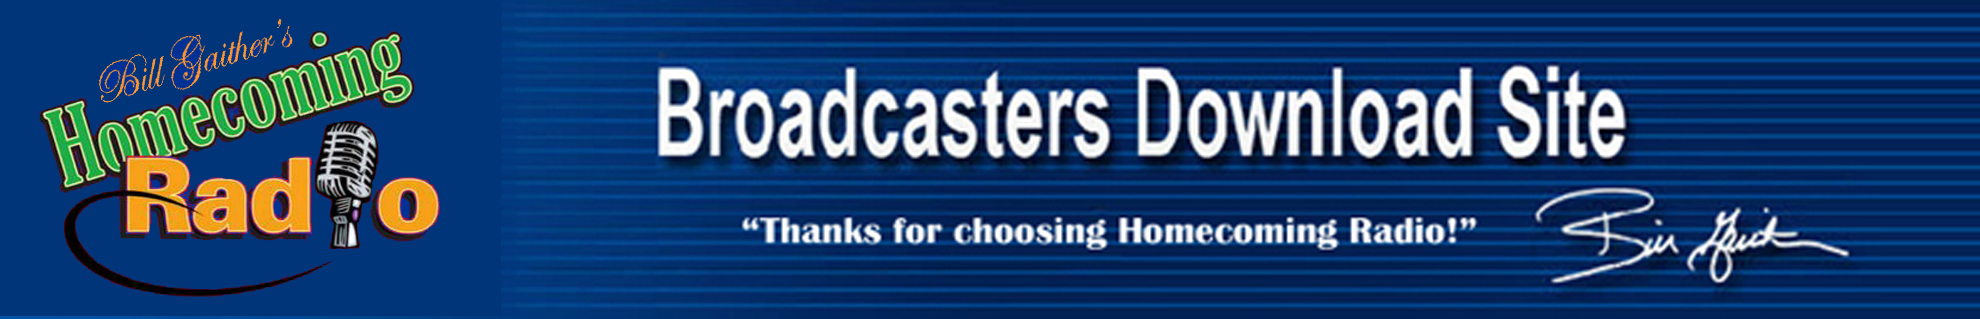 Bill Gaither's Homecoming Radio Broadcaster Site Logo